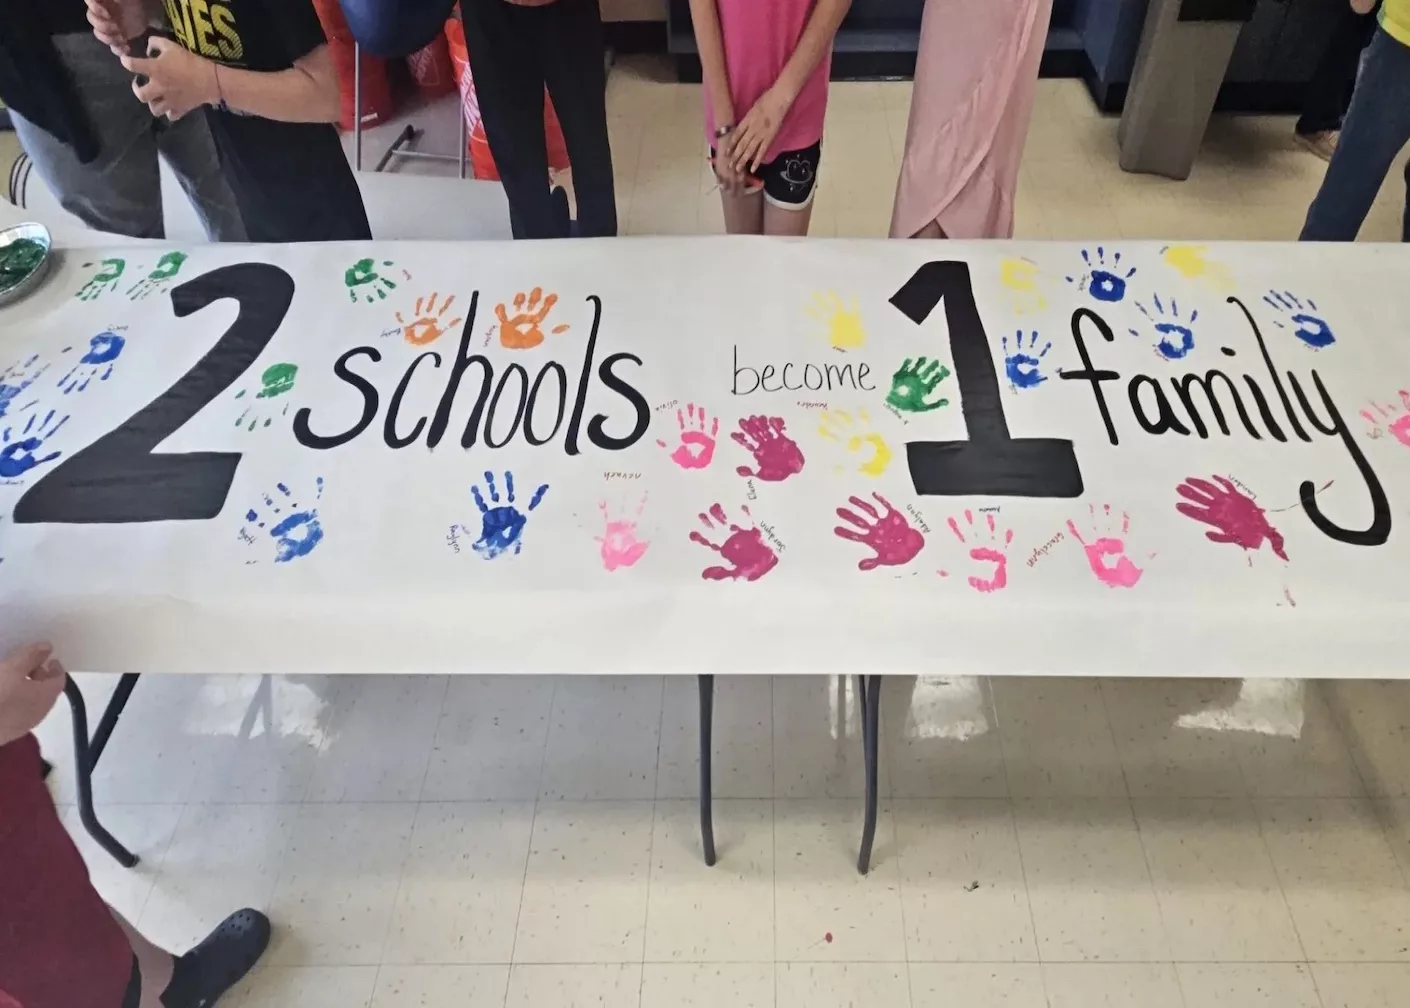 A paper sign with painted handprints with text that reads "2 schools 1 family"